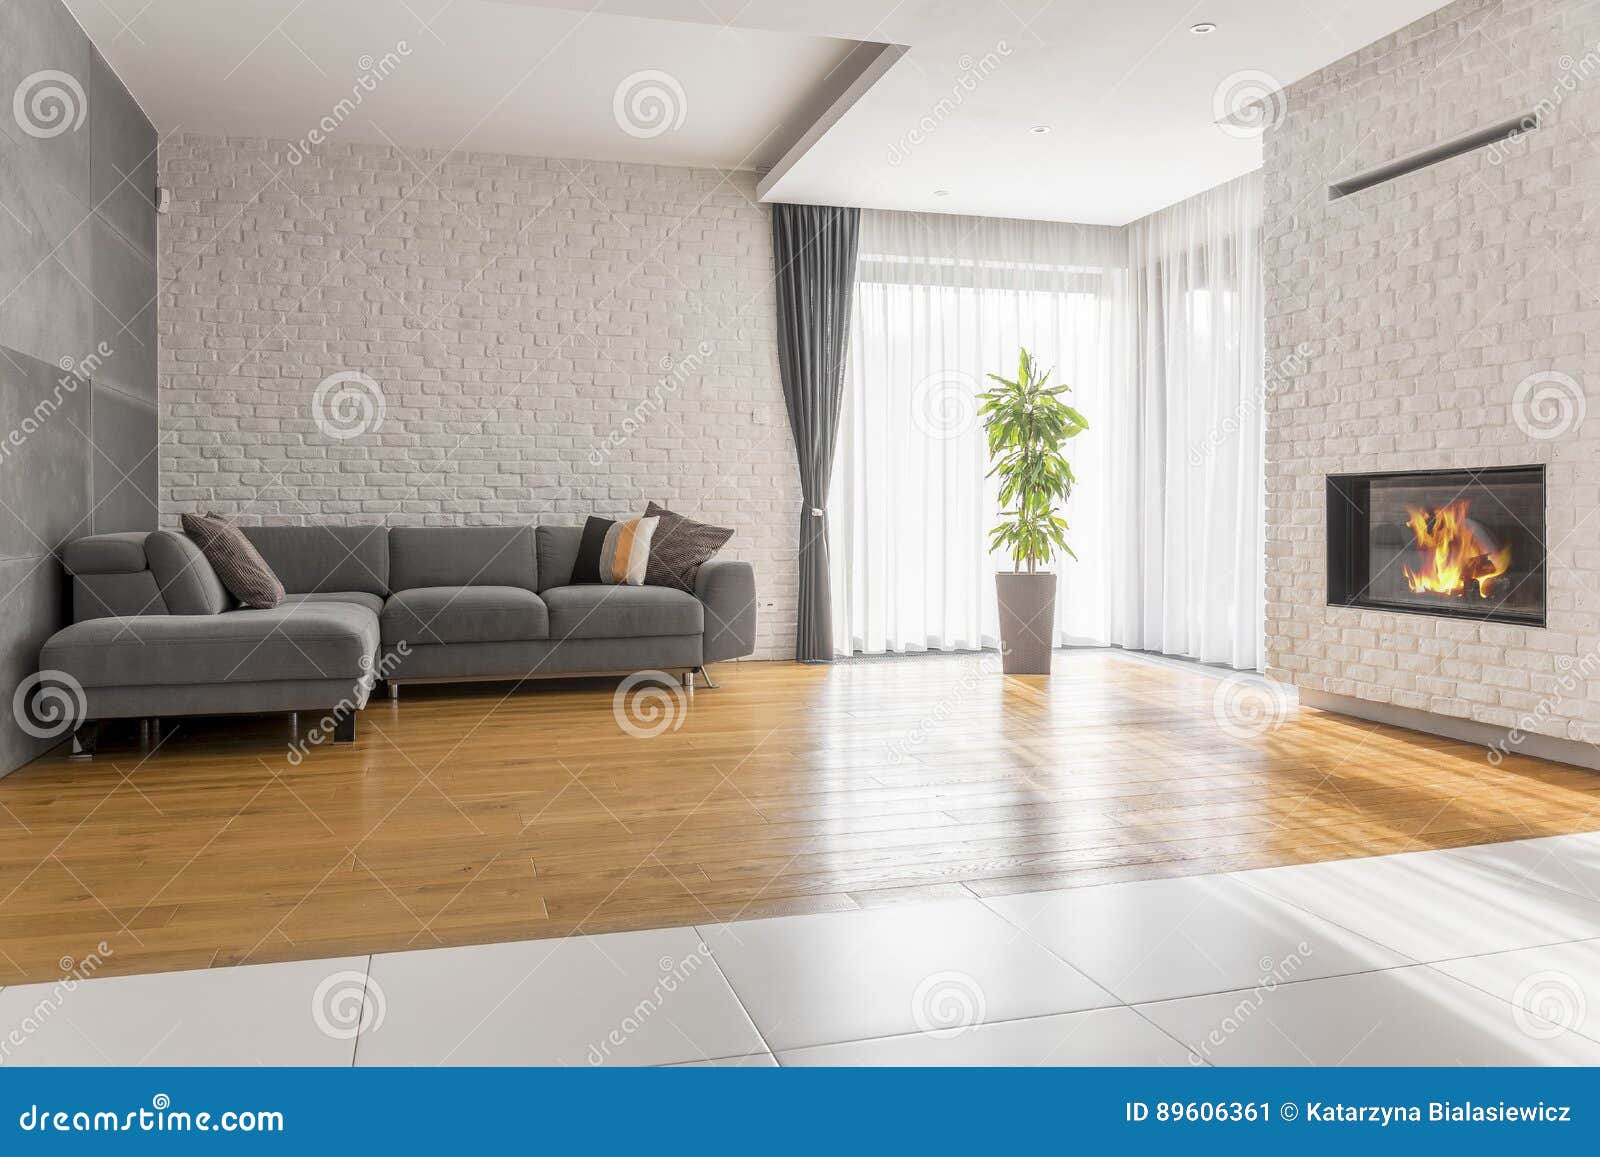 Fancy Living Room With Sofa Stock Image Image Of Grey